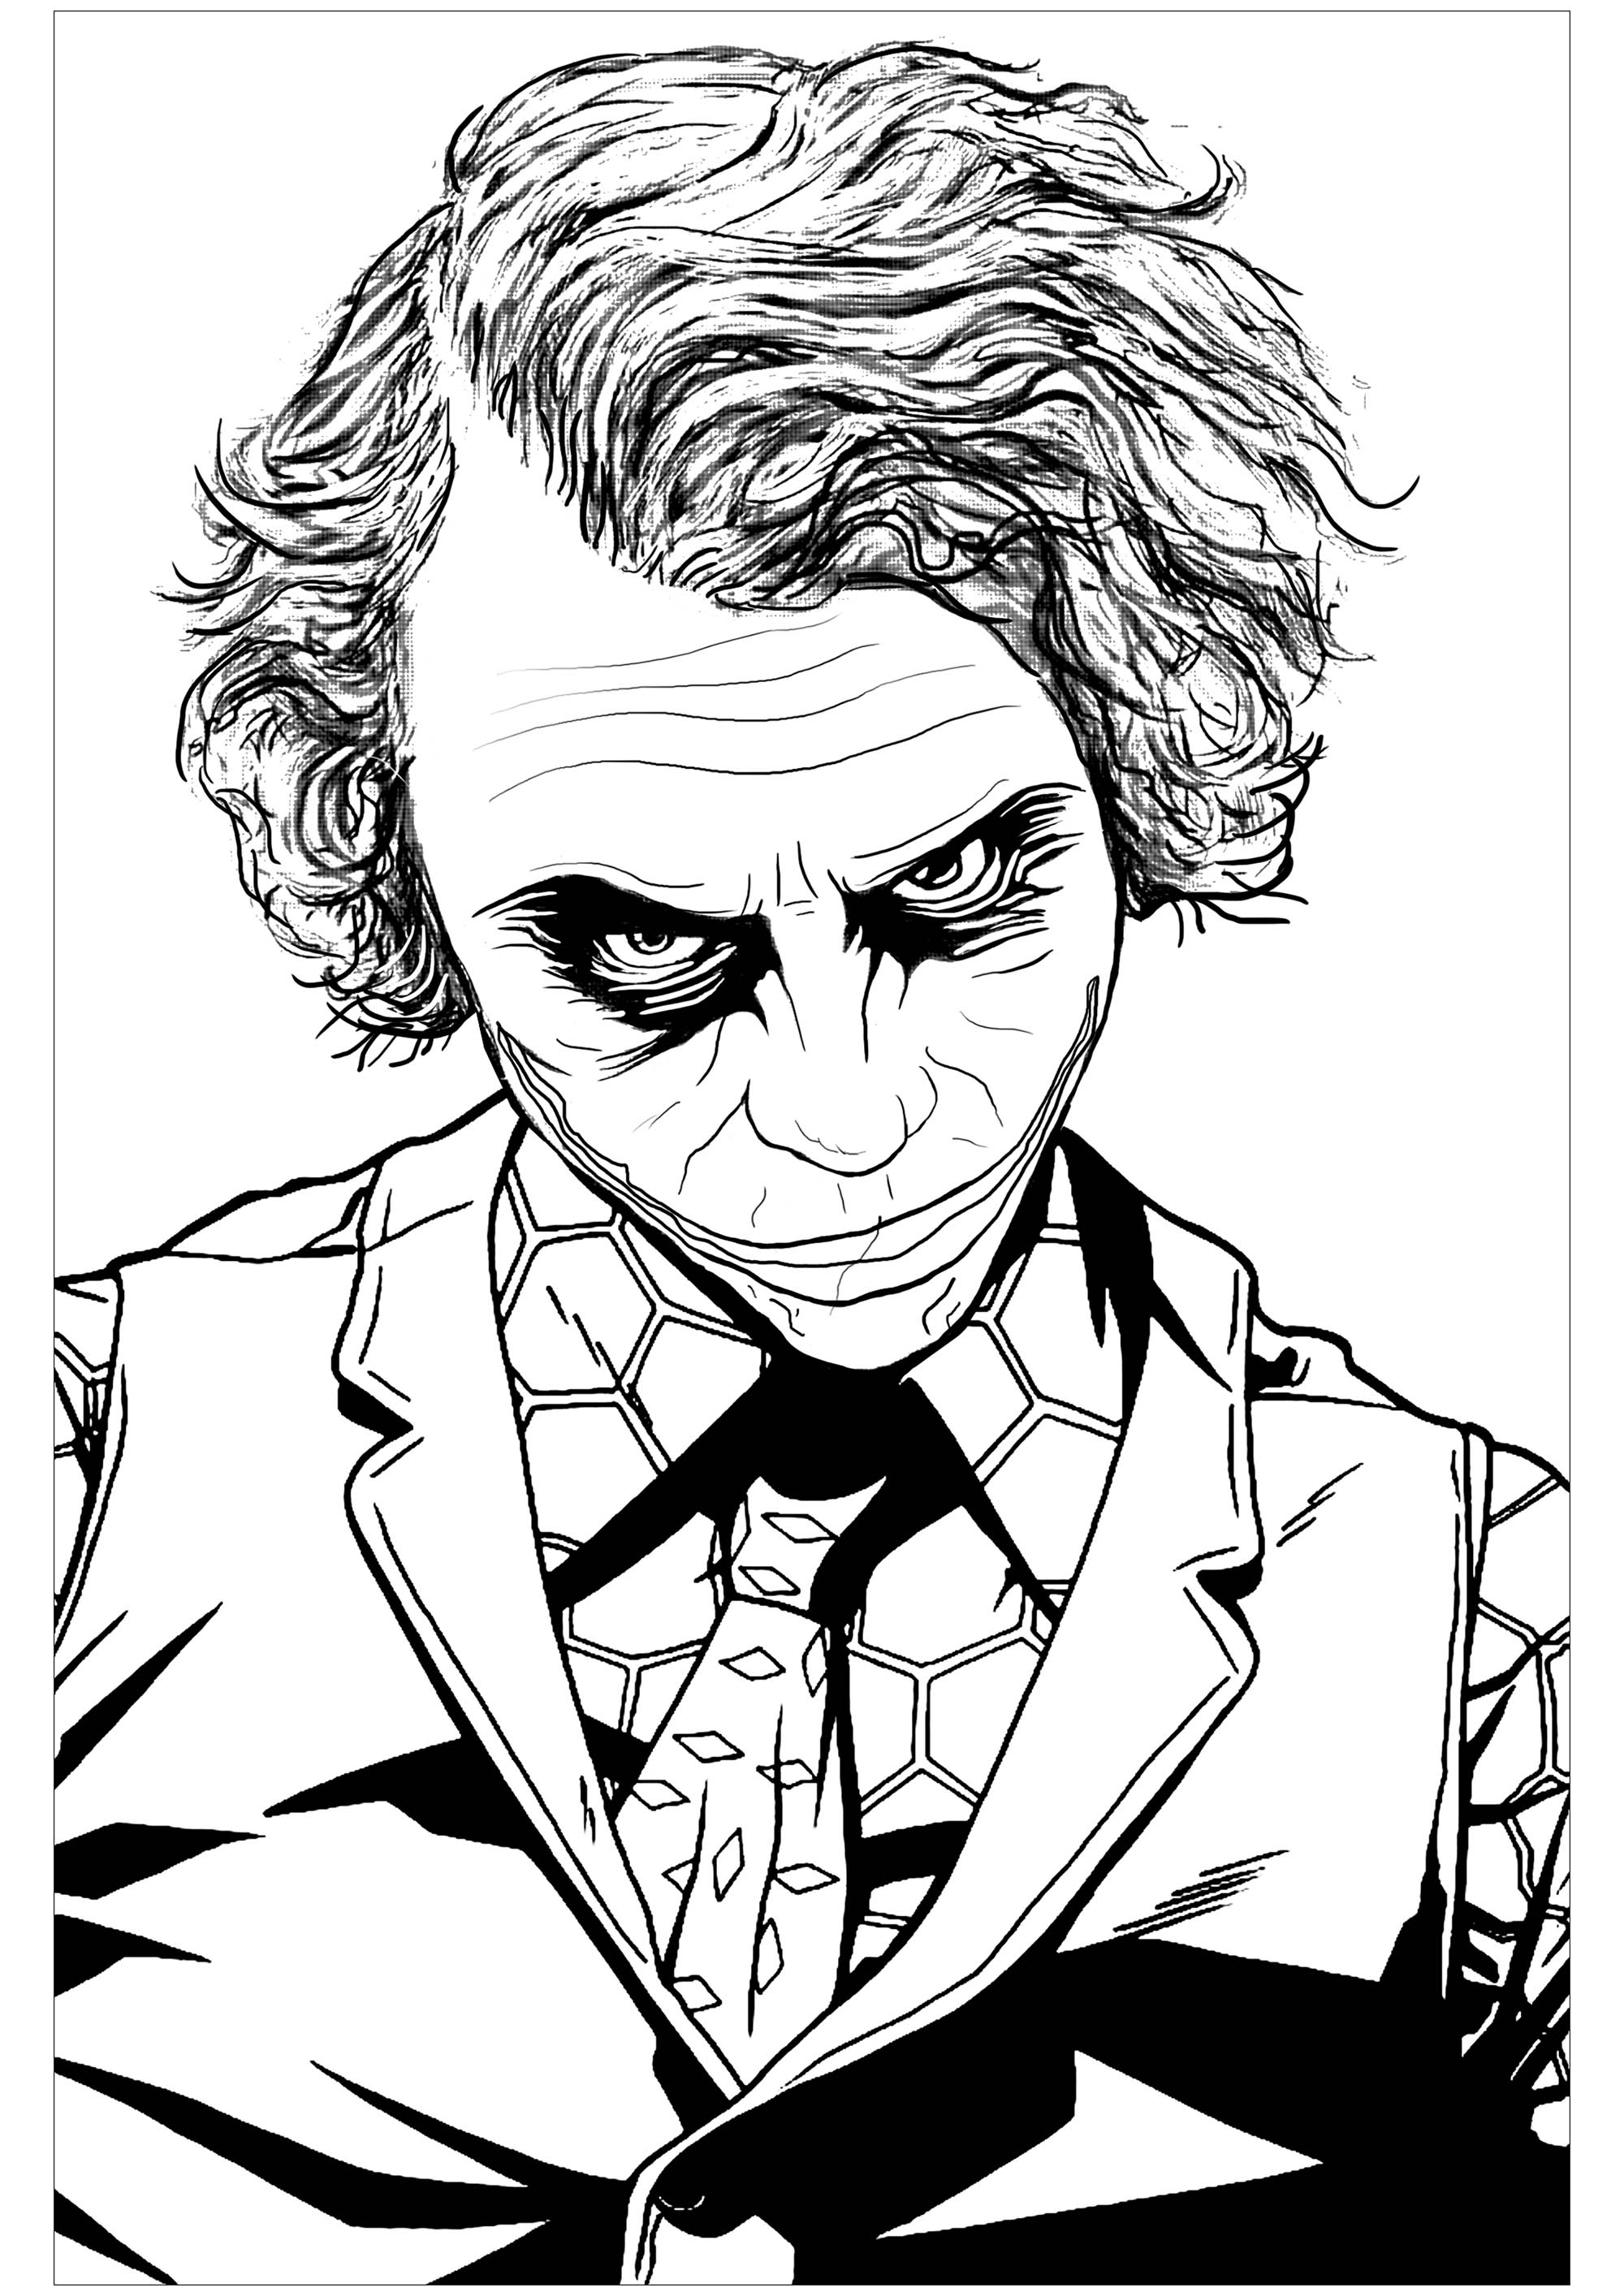 Coloring page inspired by the infamous Batman villain The Joker in 'The Dark Knight' (interpreted by Heath Ledger), Artist : Art. Isabelle